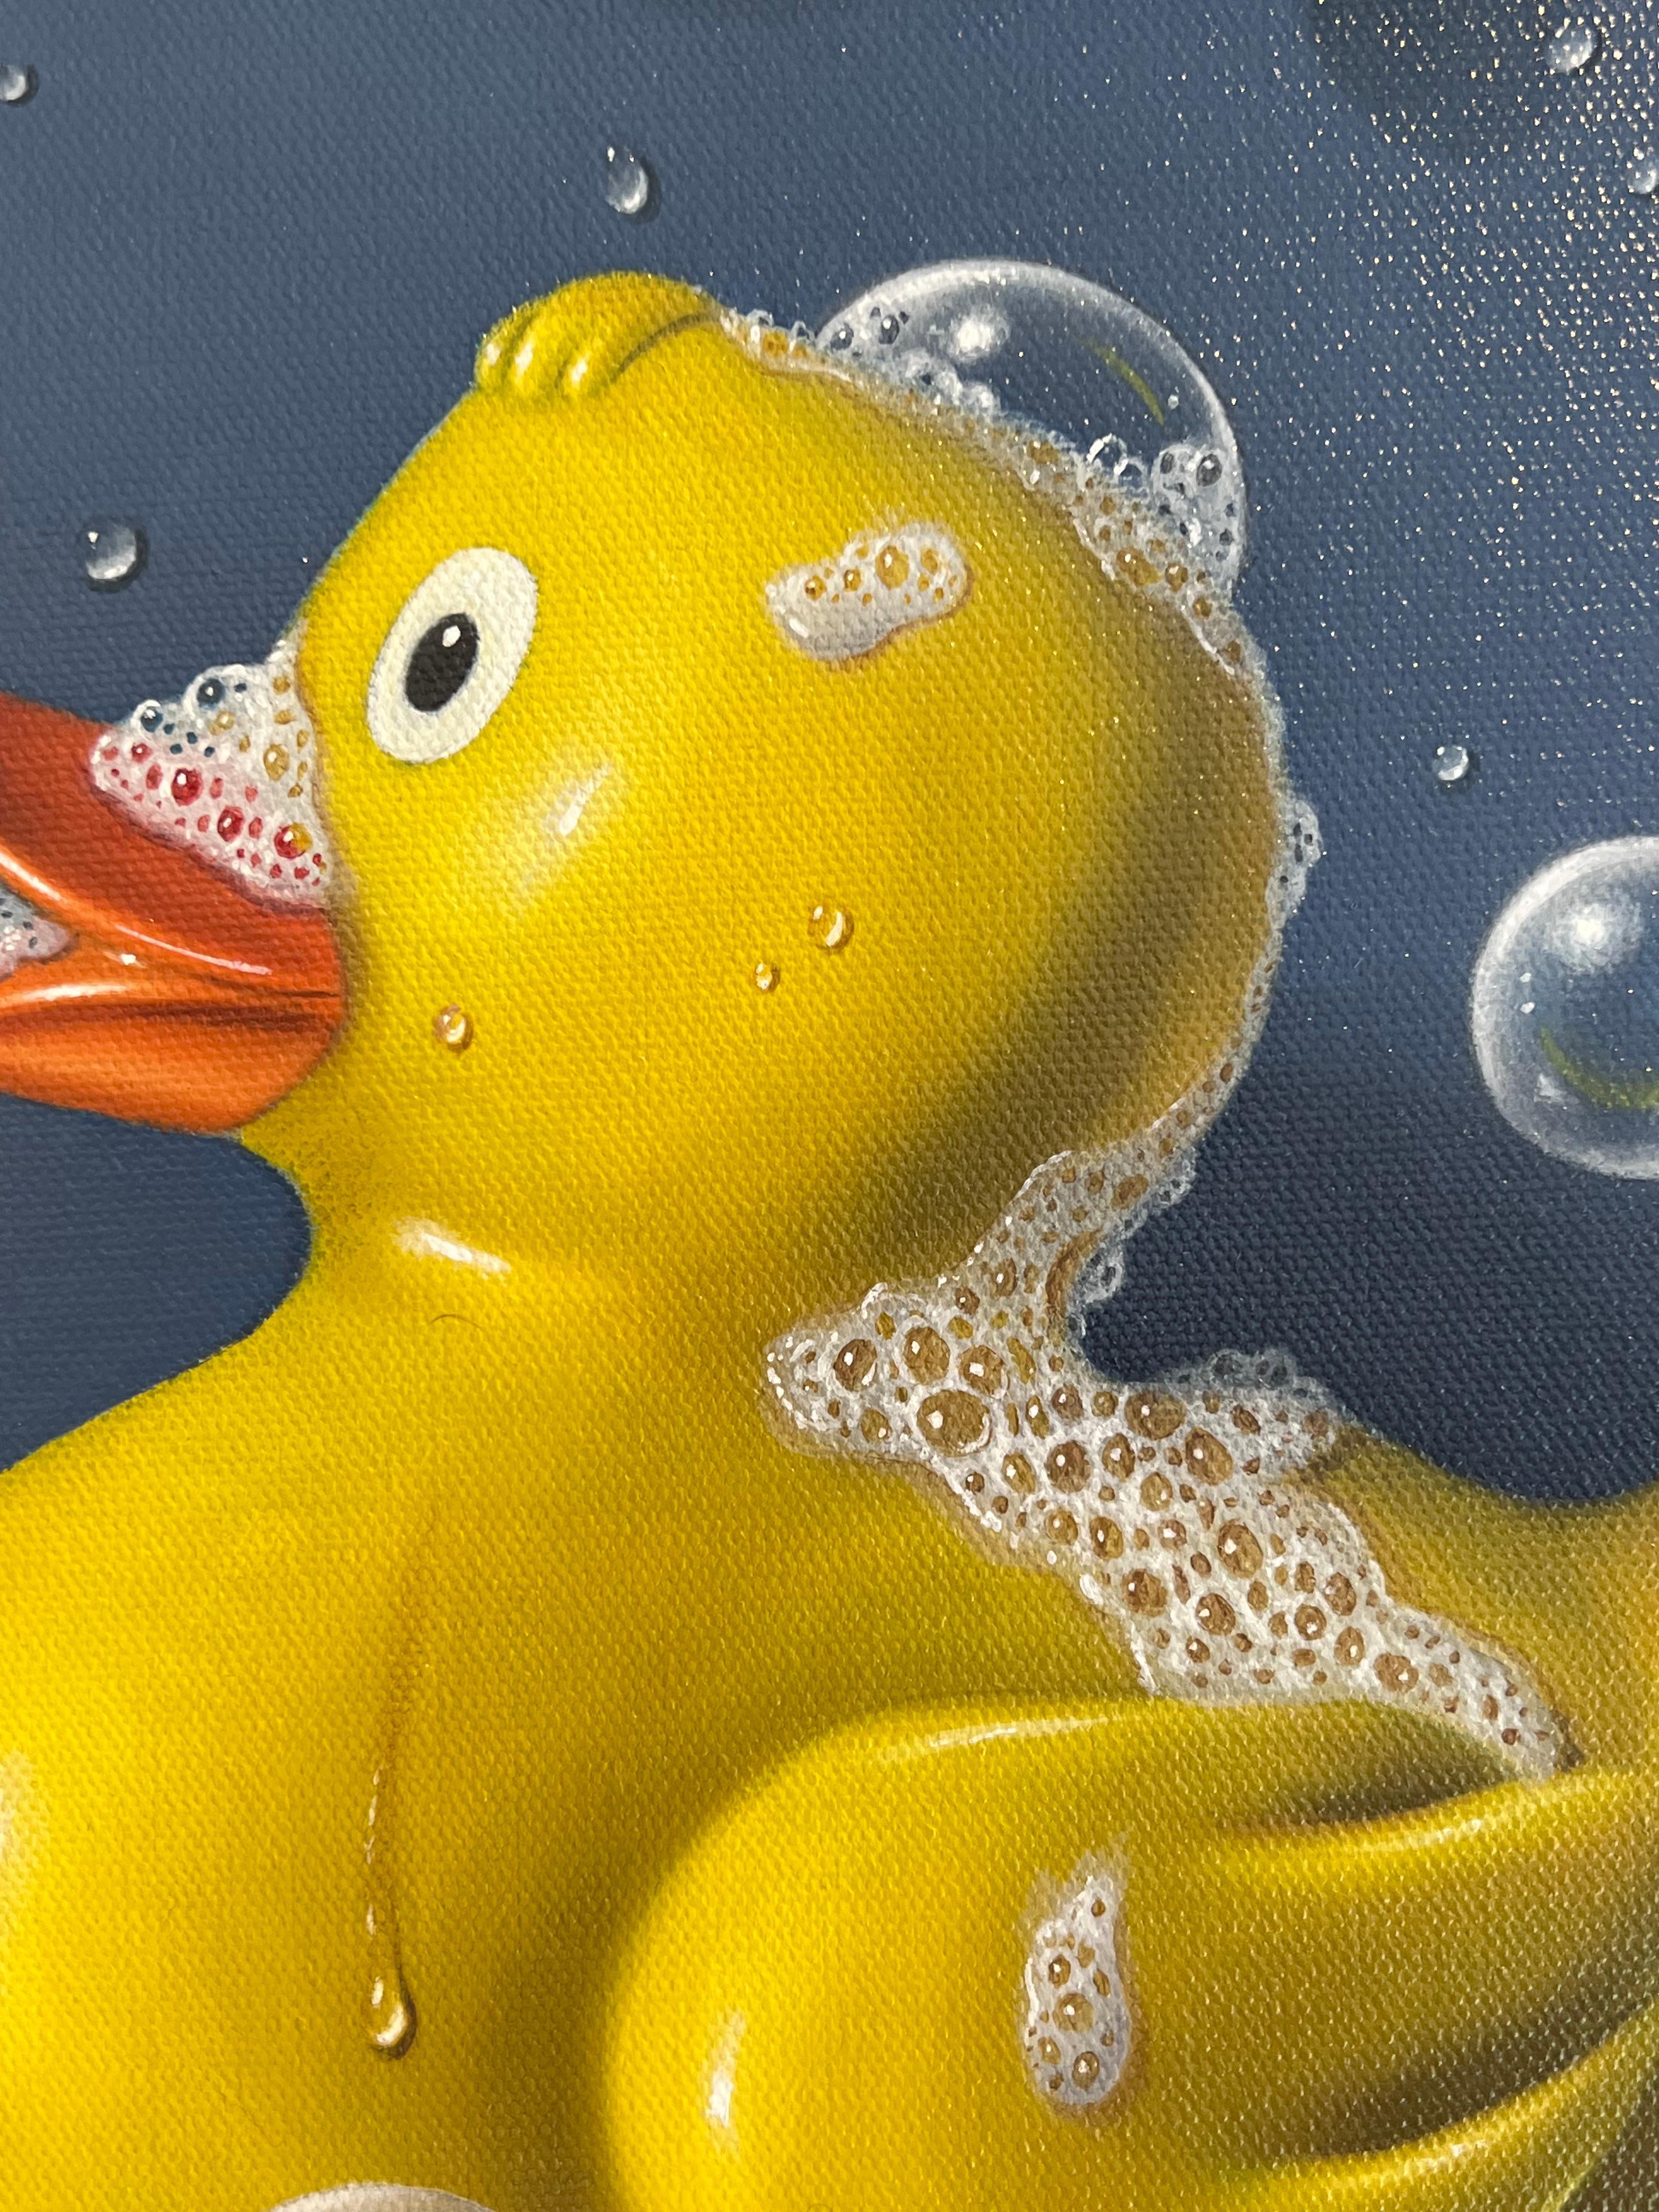 In George A. Gonzalez’s “Rubber Ducky,” the viewer is transported into the intimate confines of a bathroom, where a familiar childhood toy takes center stage. The yellow rubber ducky rests upon a small shelf protruding from a ceramic wall, instantly